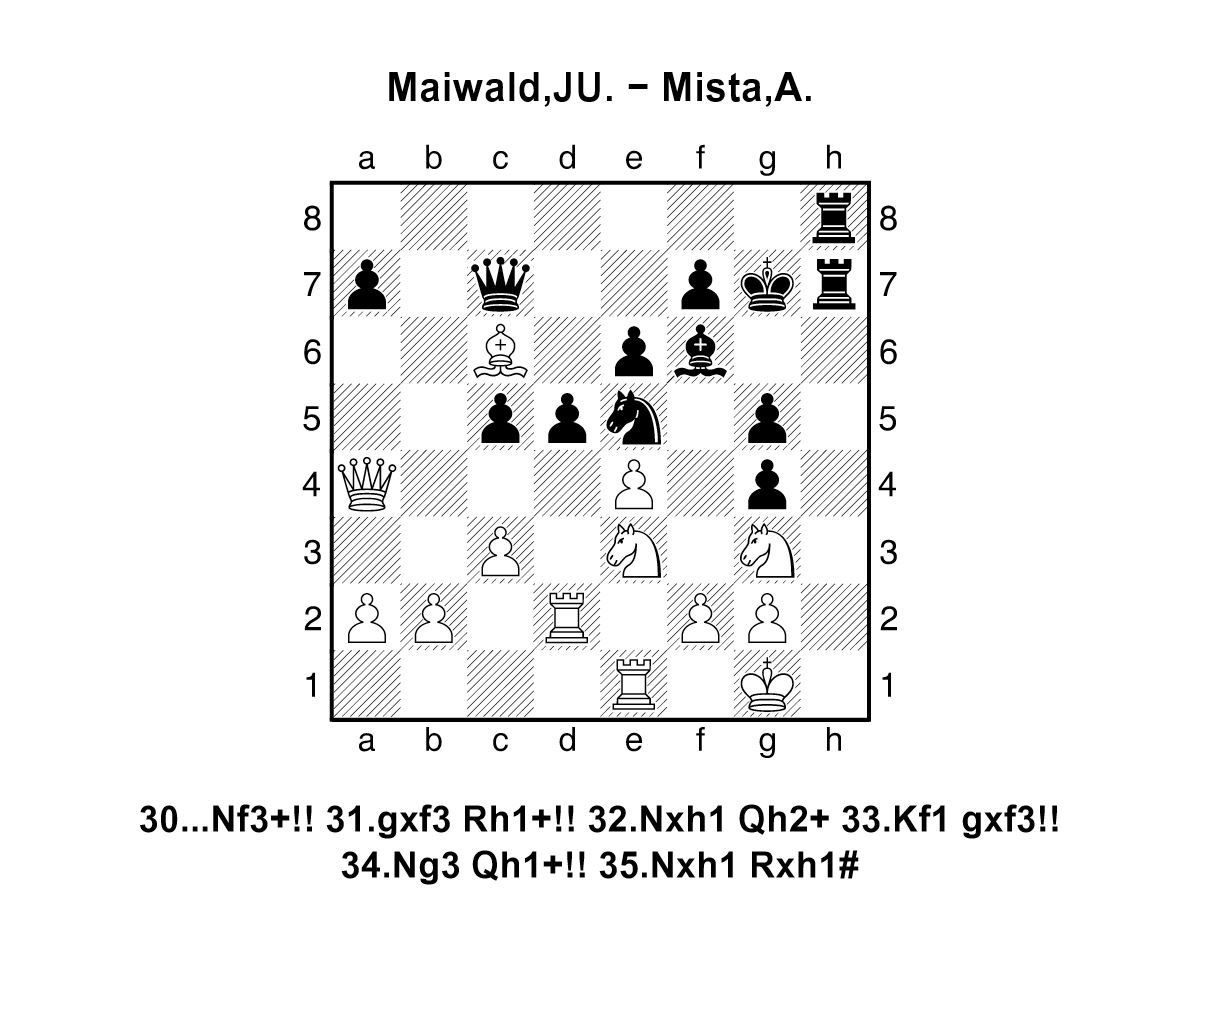 Illustration of the Chess Game board during a match between Maiwald and Mista